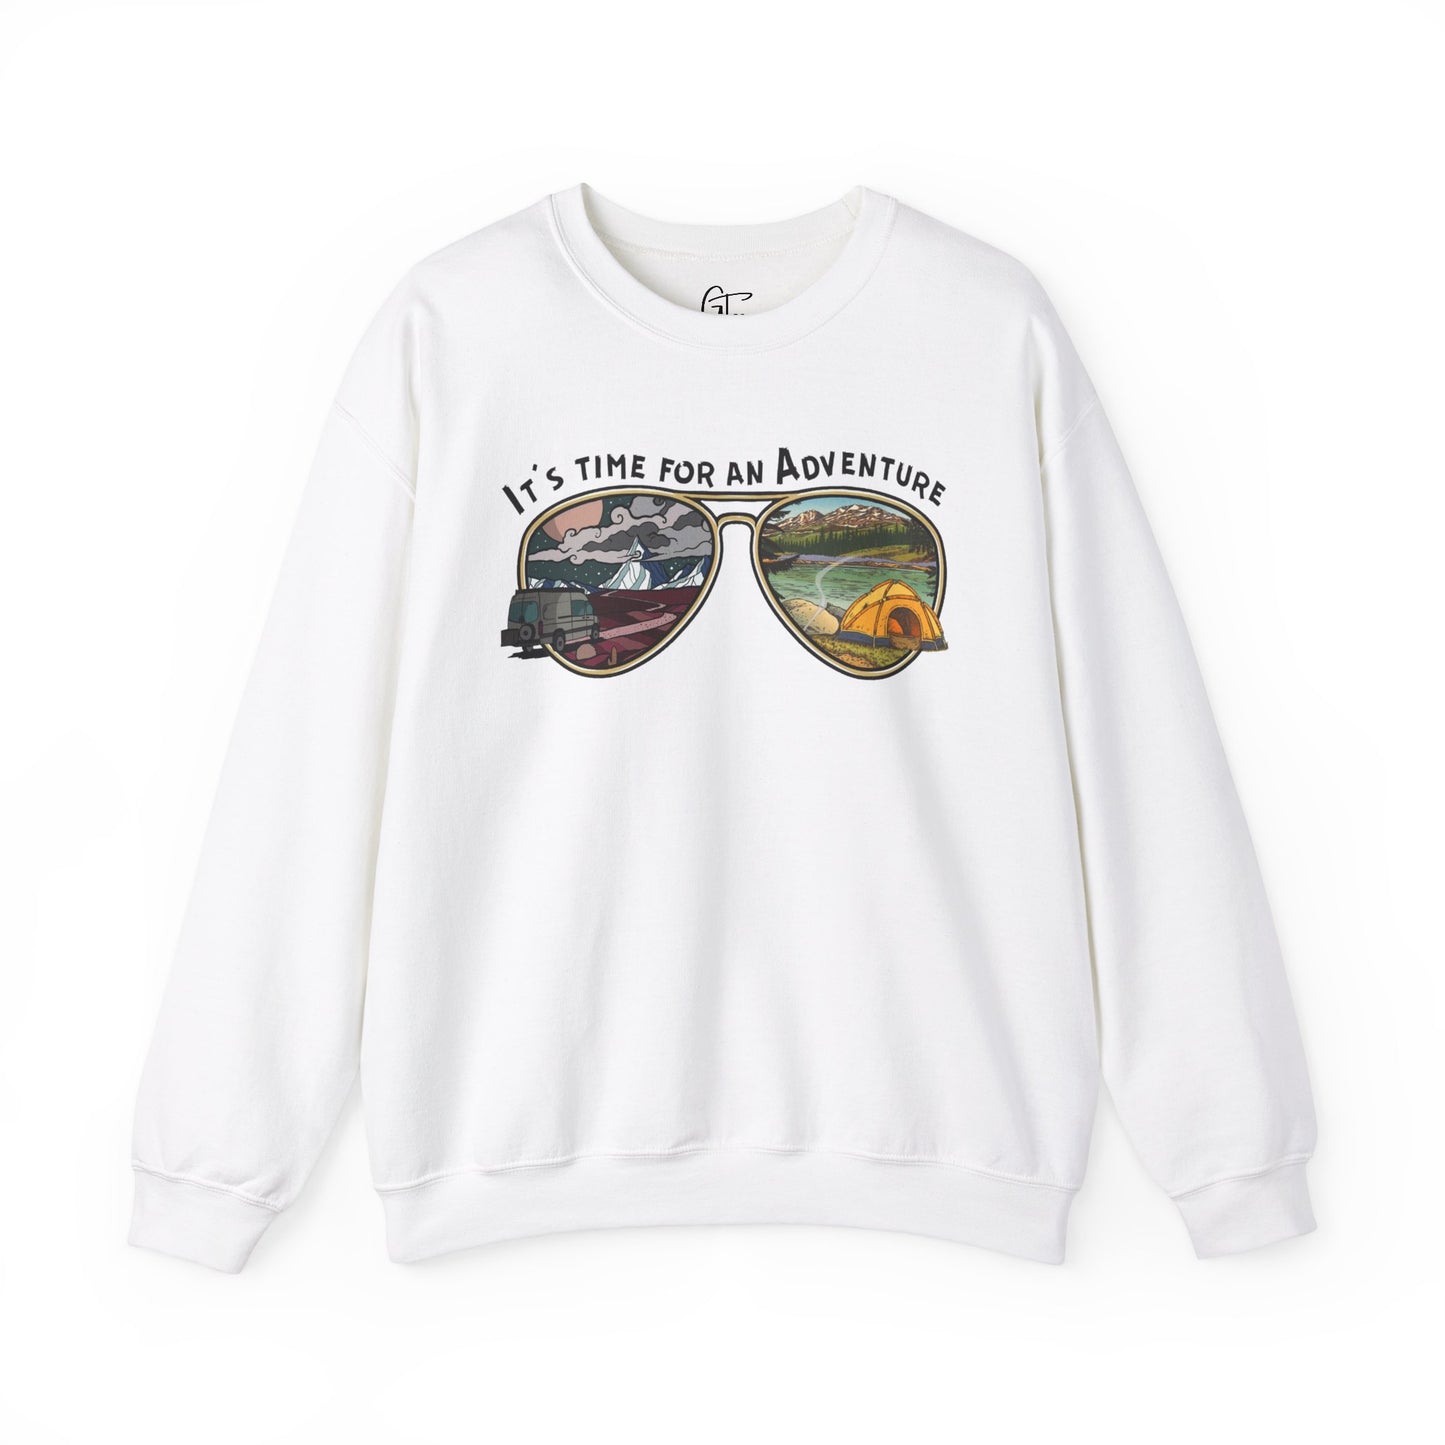 It's Time for an Adventure Sweatshirt